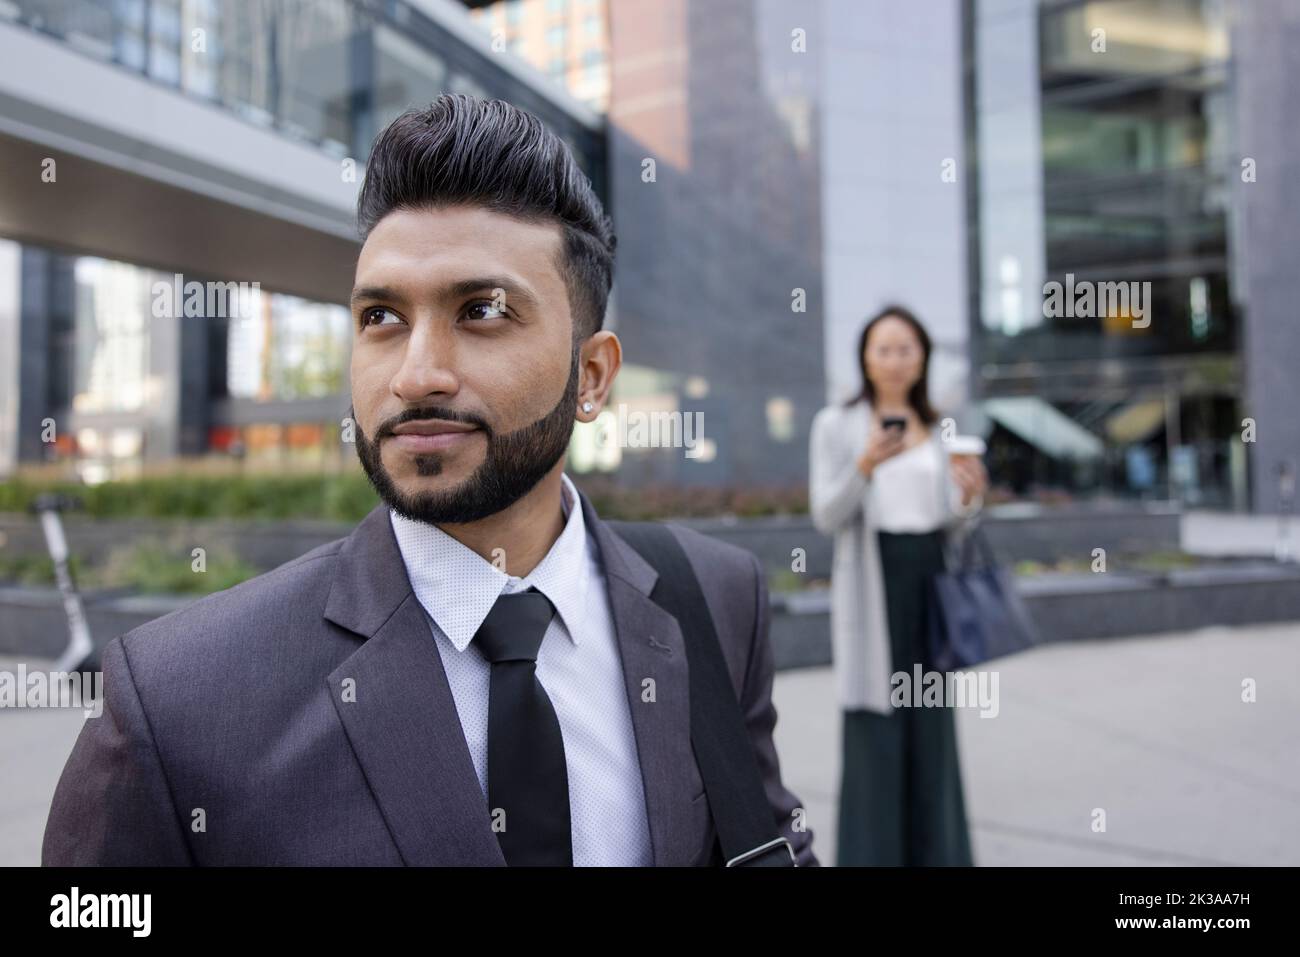 Portrait of south asian businessman outside office Stock Photo